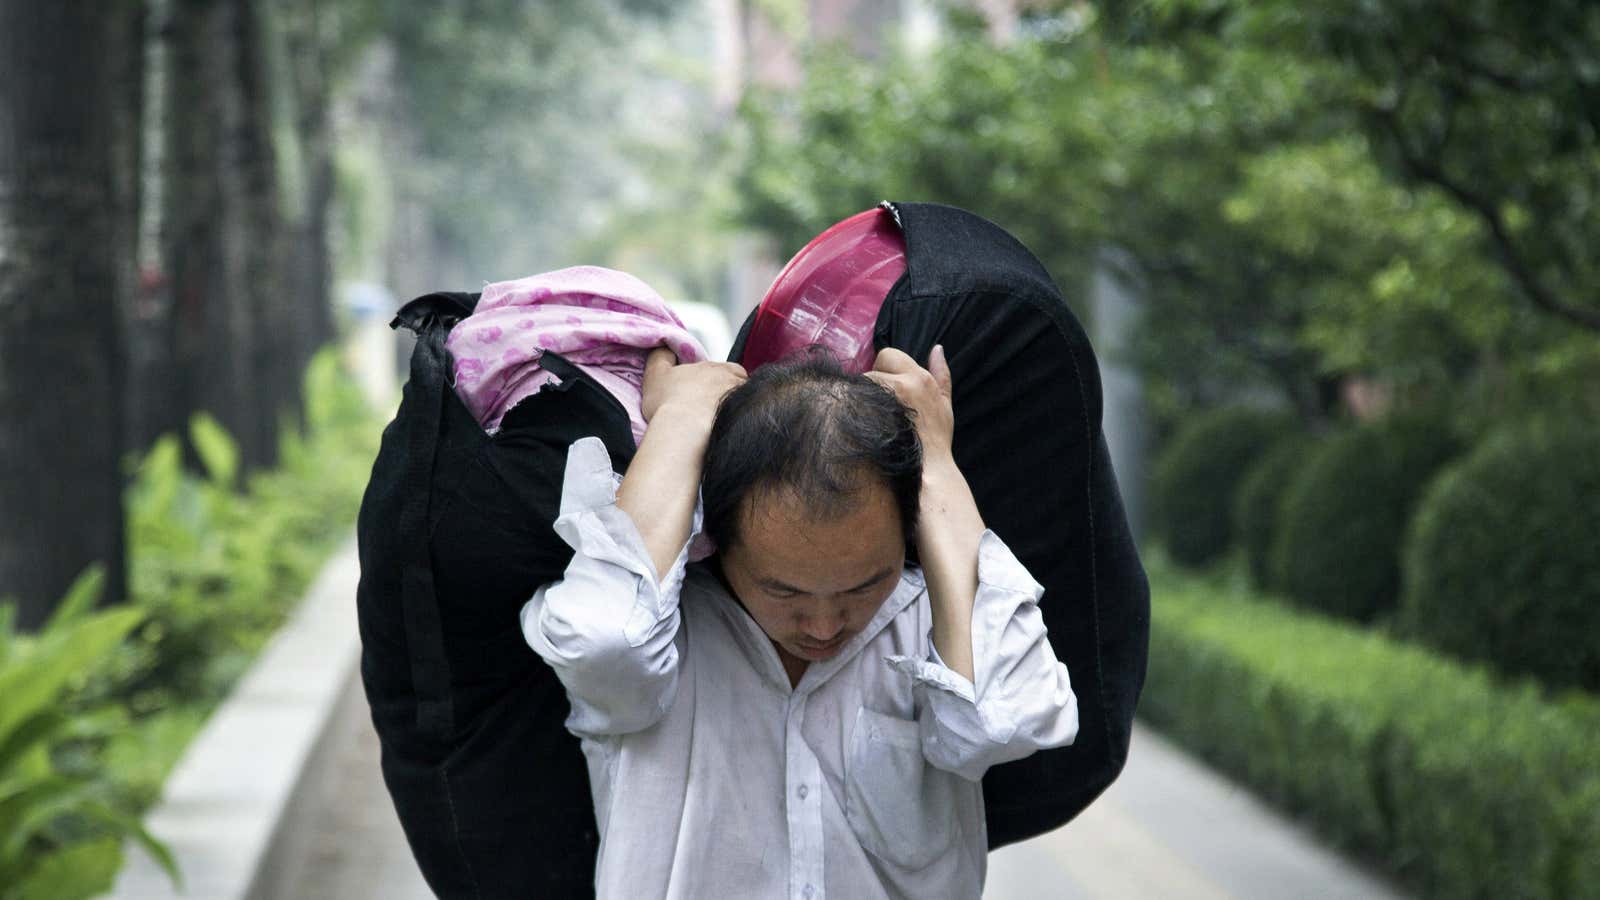 Many workers in China are no longer willing to travel long distances for bad pay.